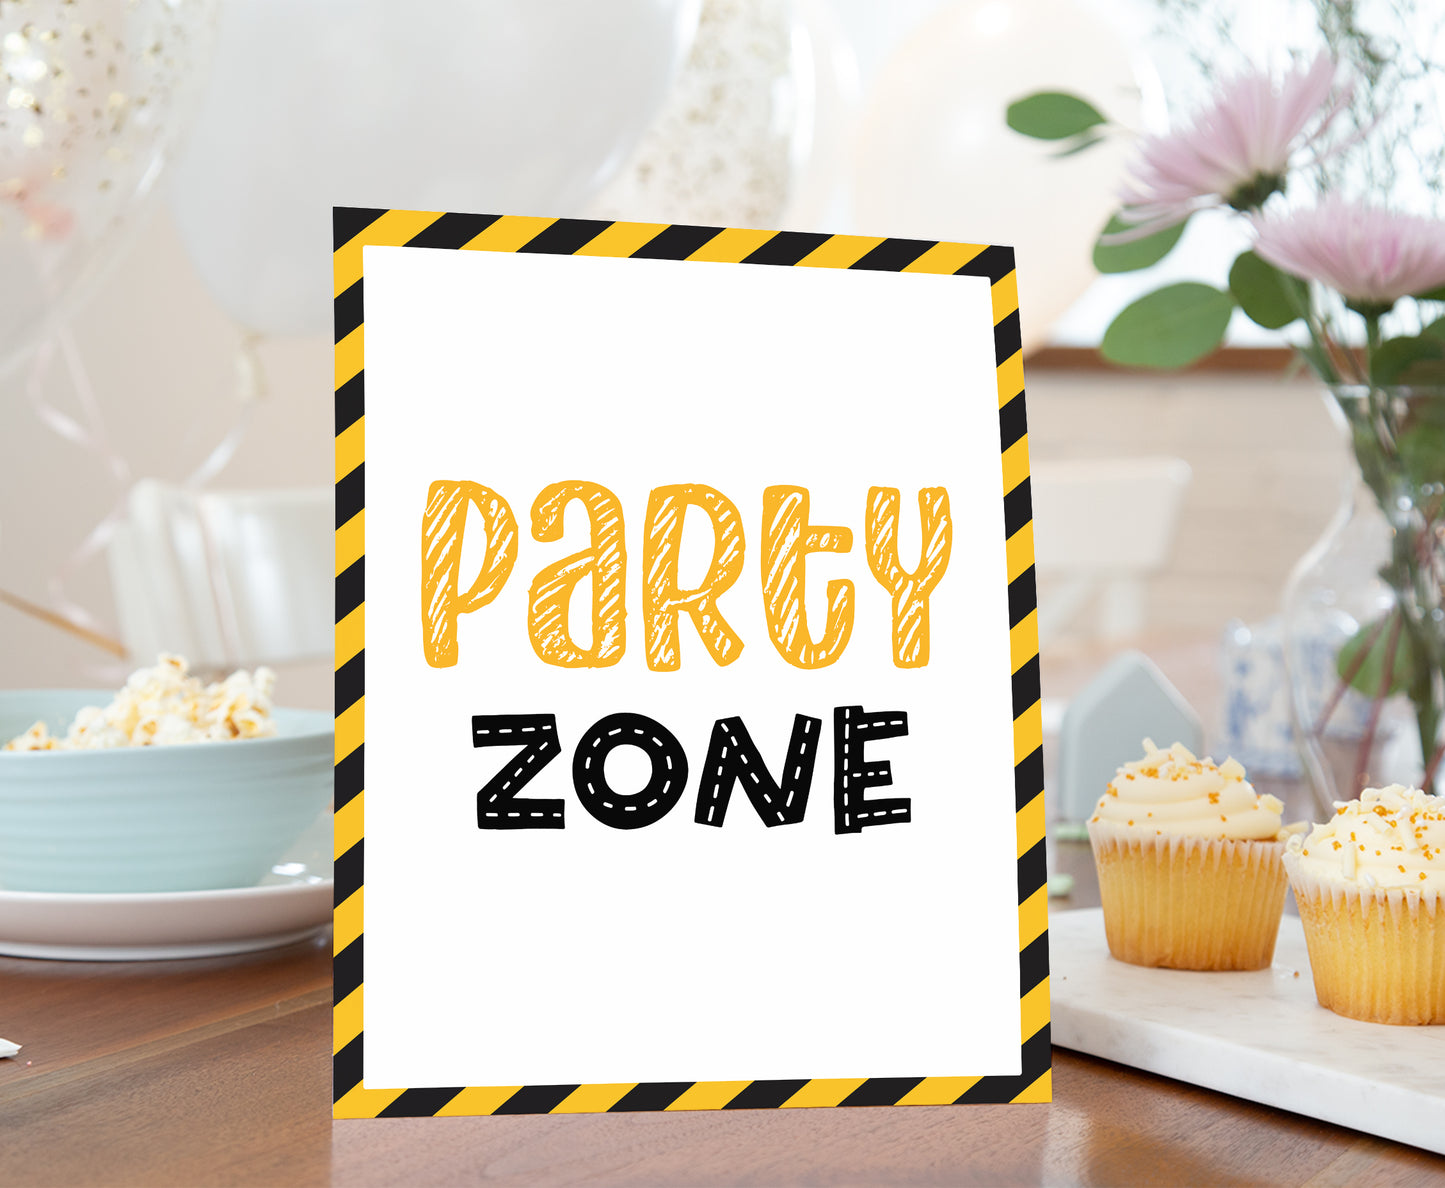 Party Zone Table Sign Printable | Construction Party Table Decoration - 07A